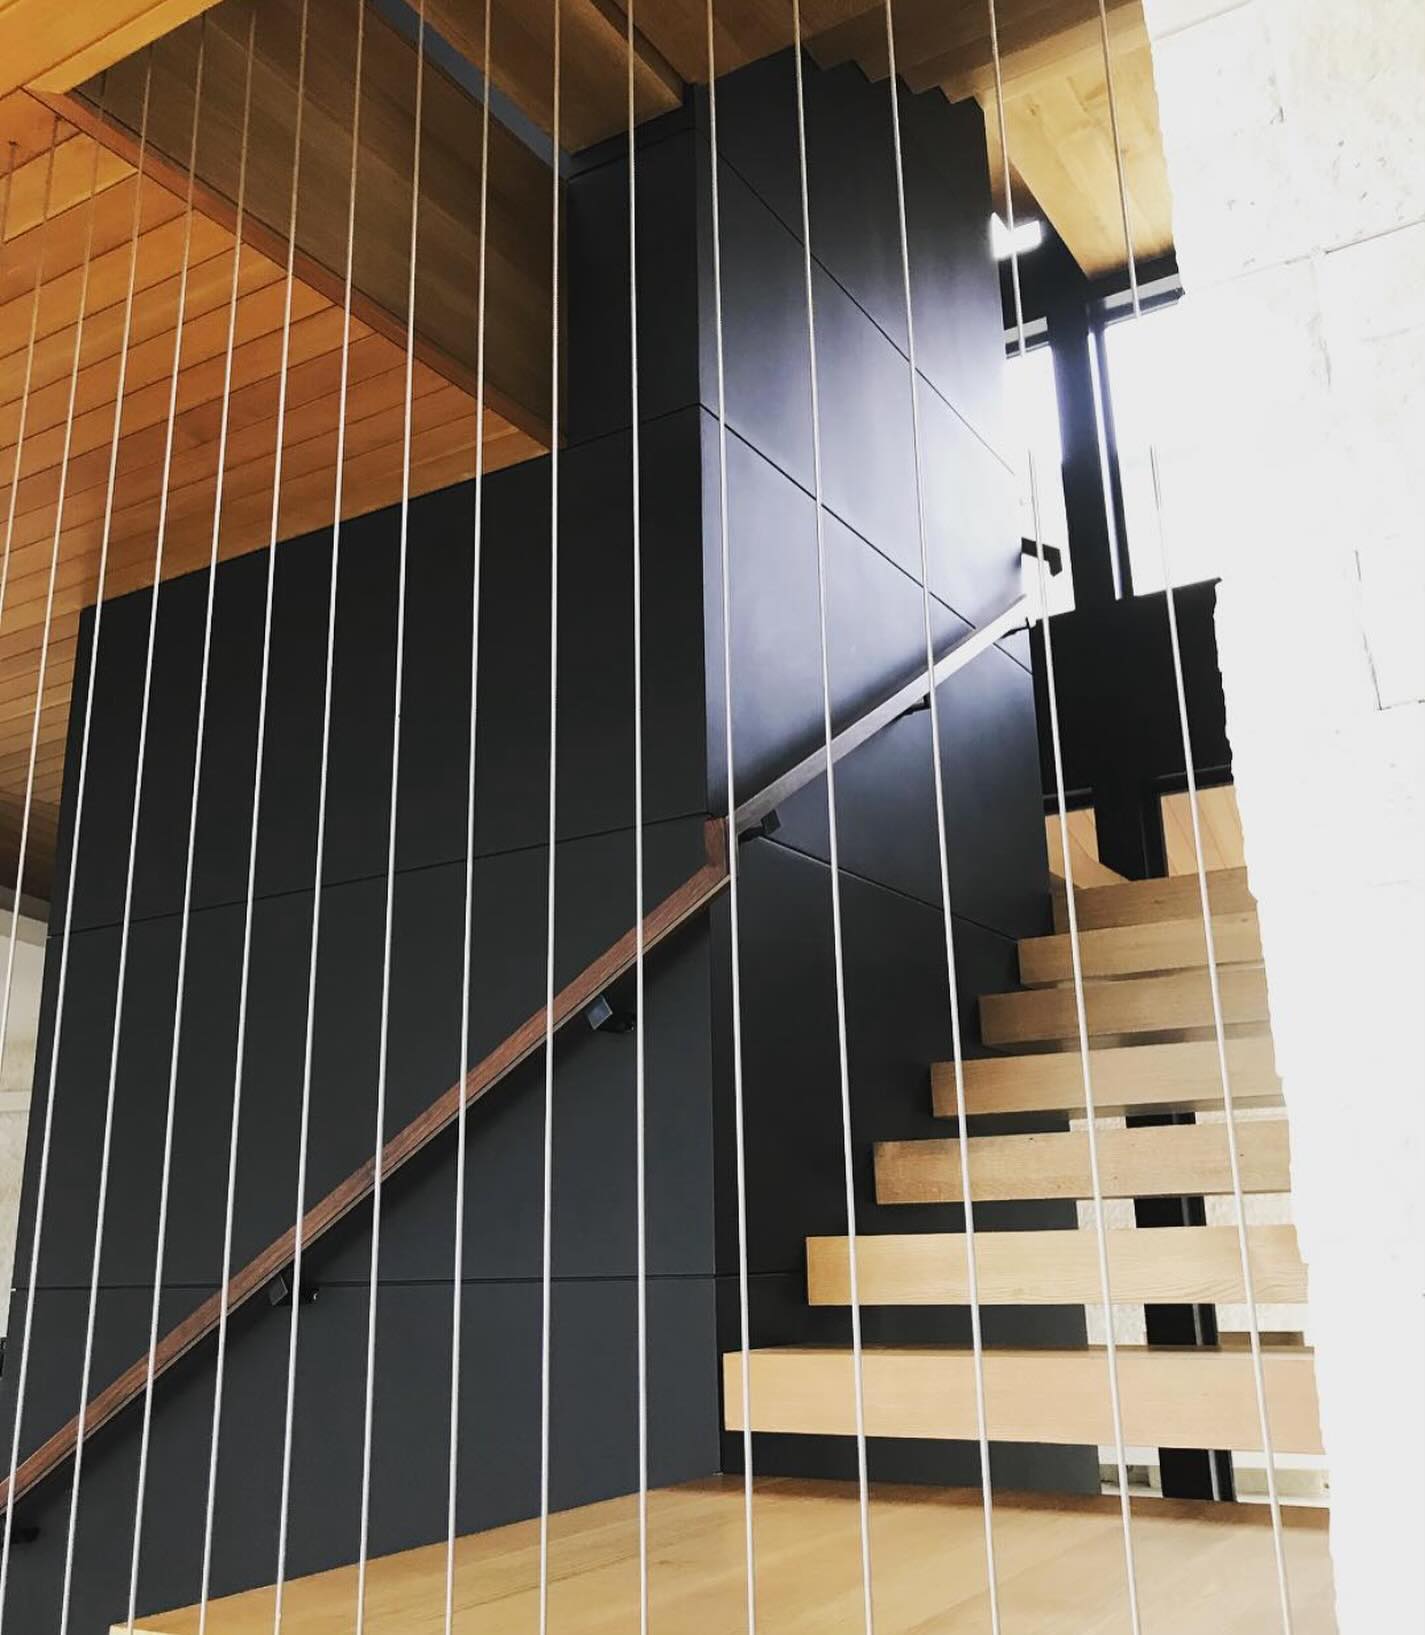 3 stories of suspended stair treads. Love our Austin craftsmen who know how to deliver on our client’s vision.